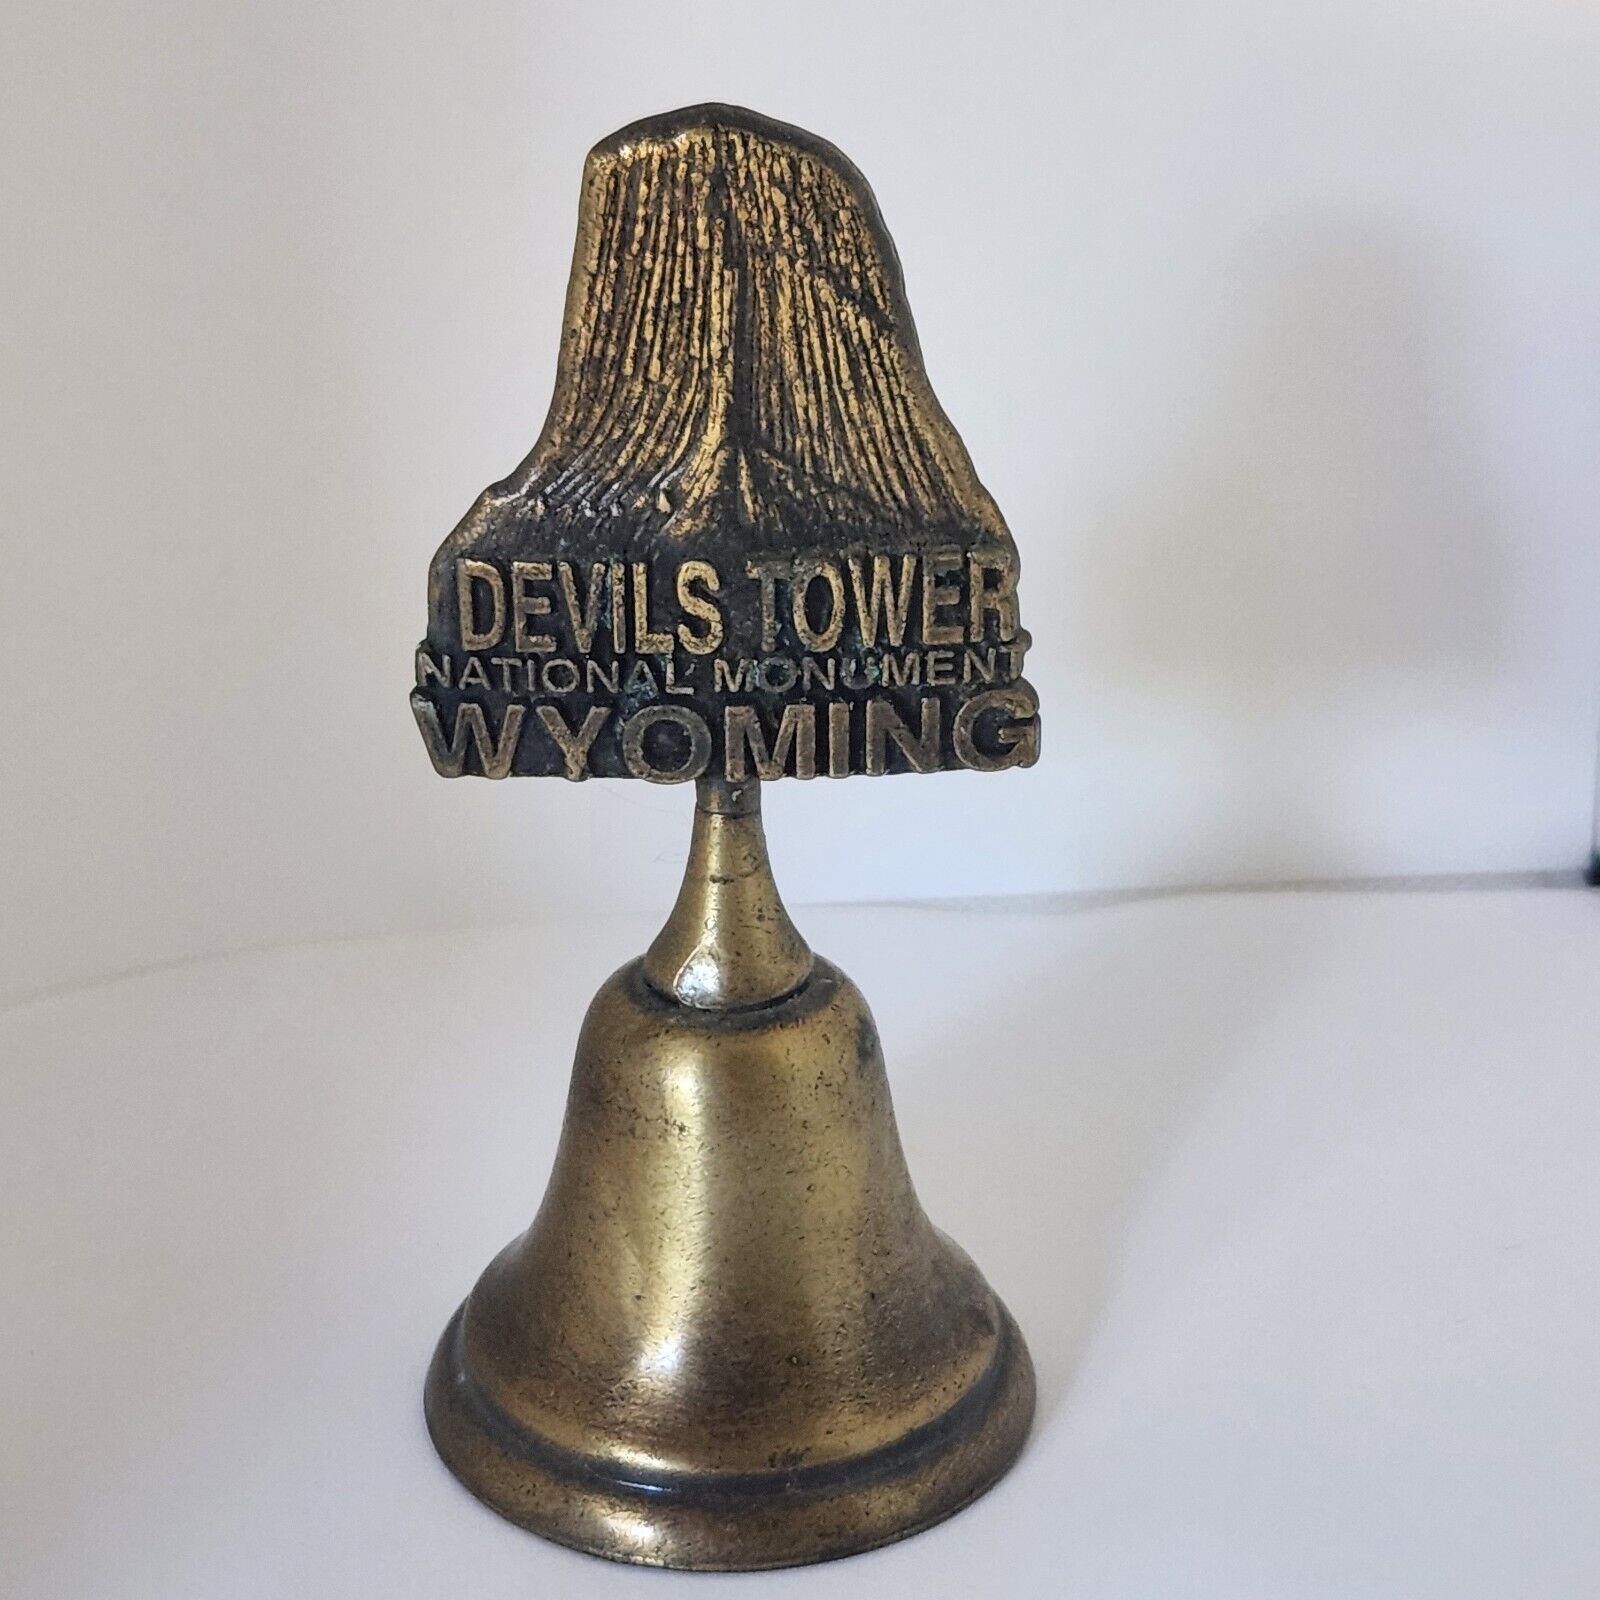 Brass Bell Devils Tower National Monument Wyoming